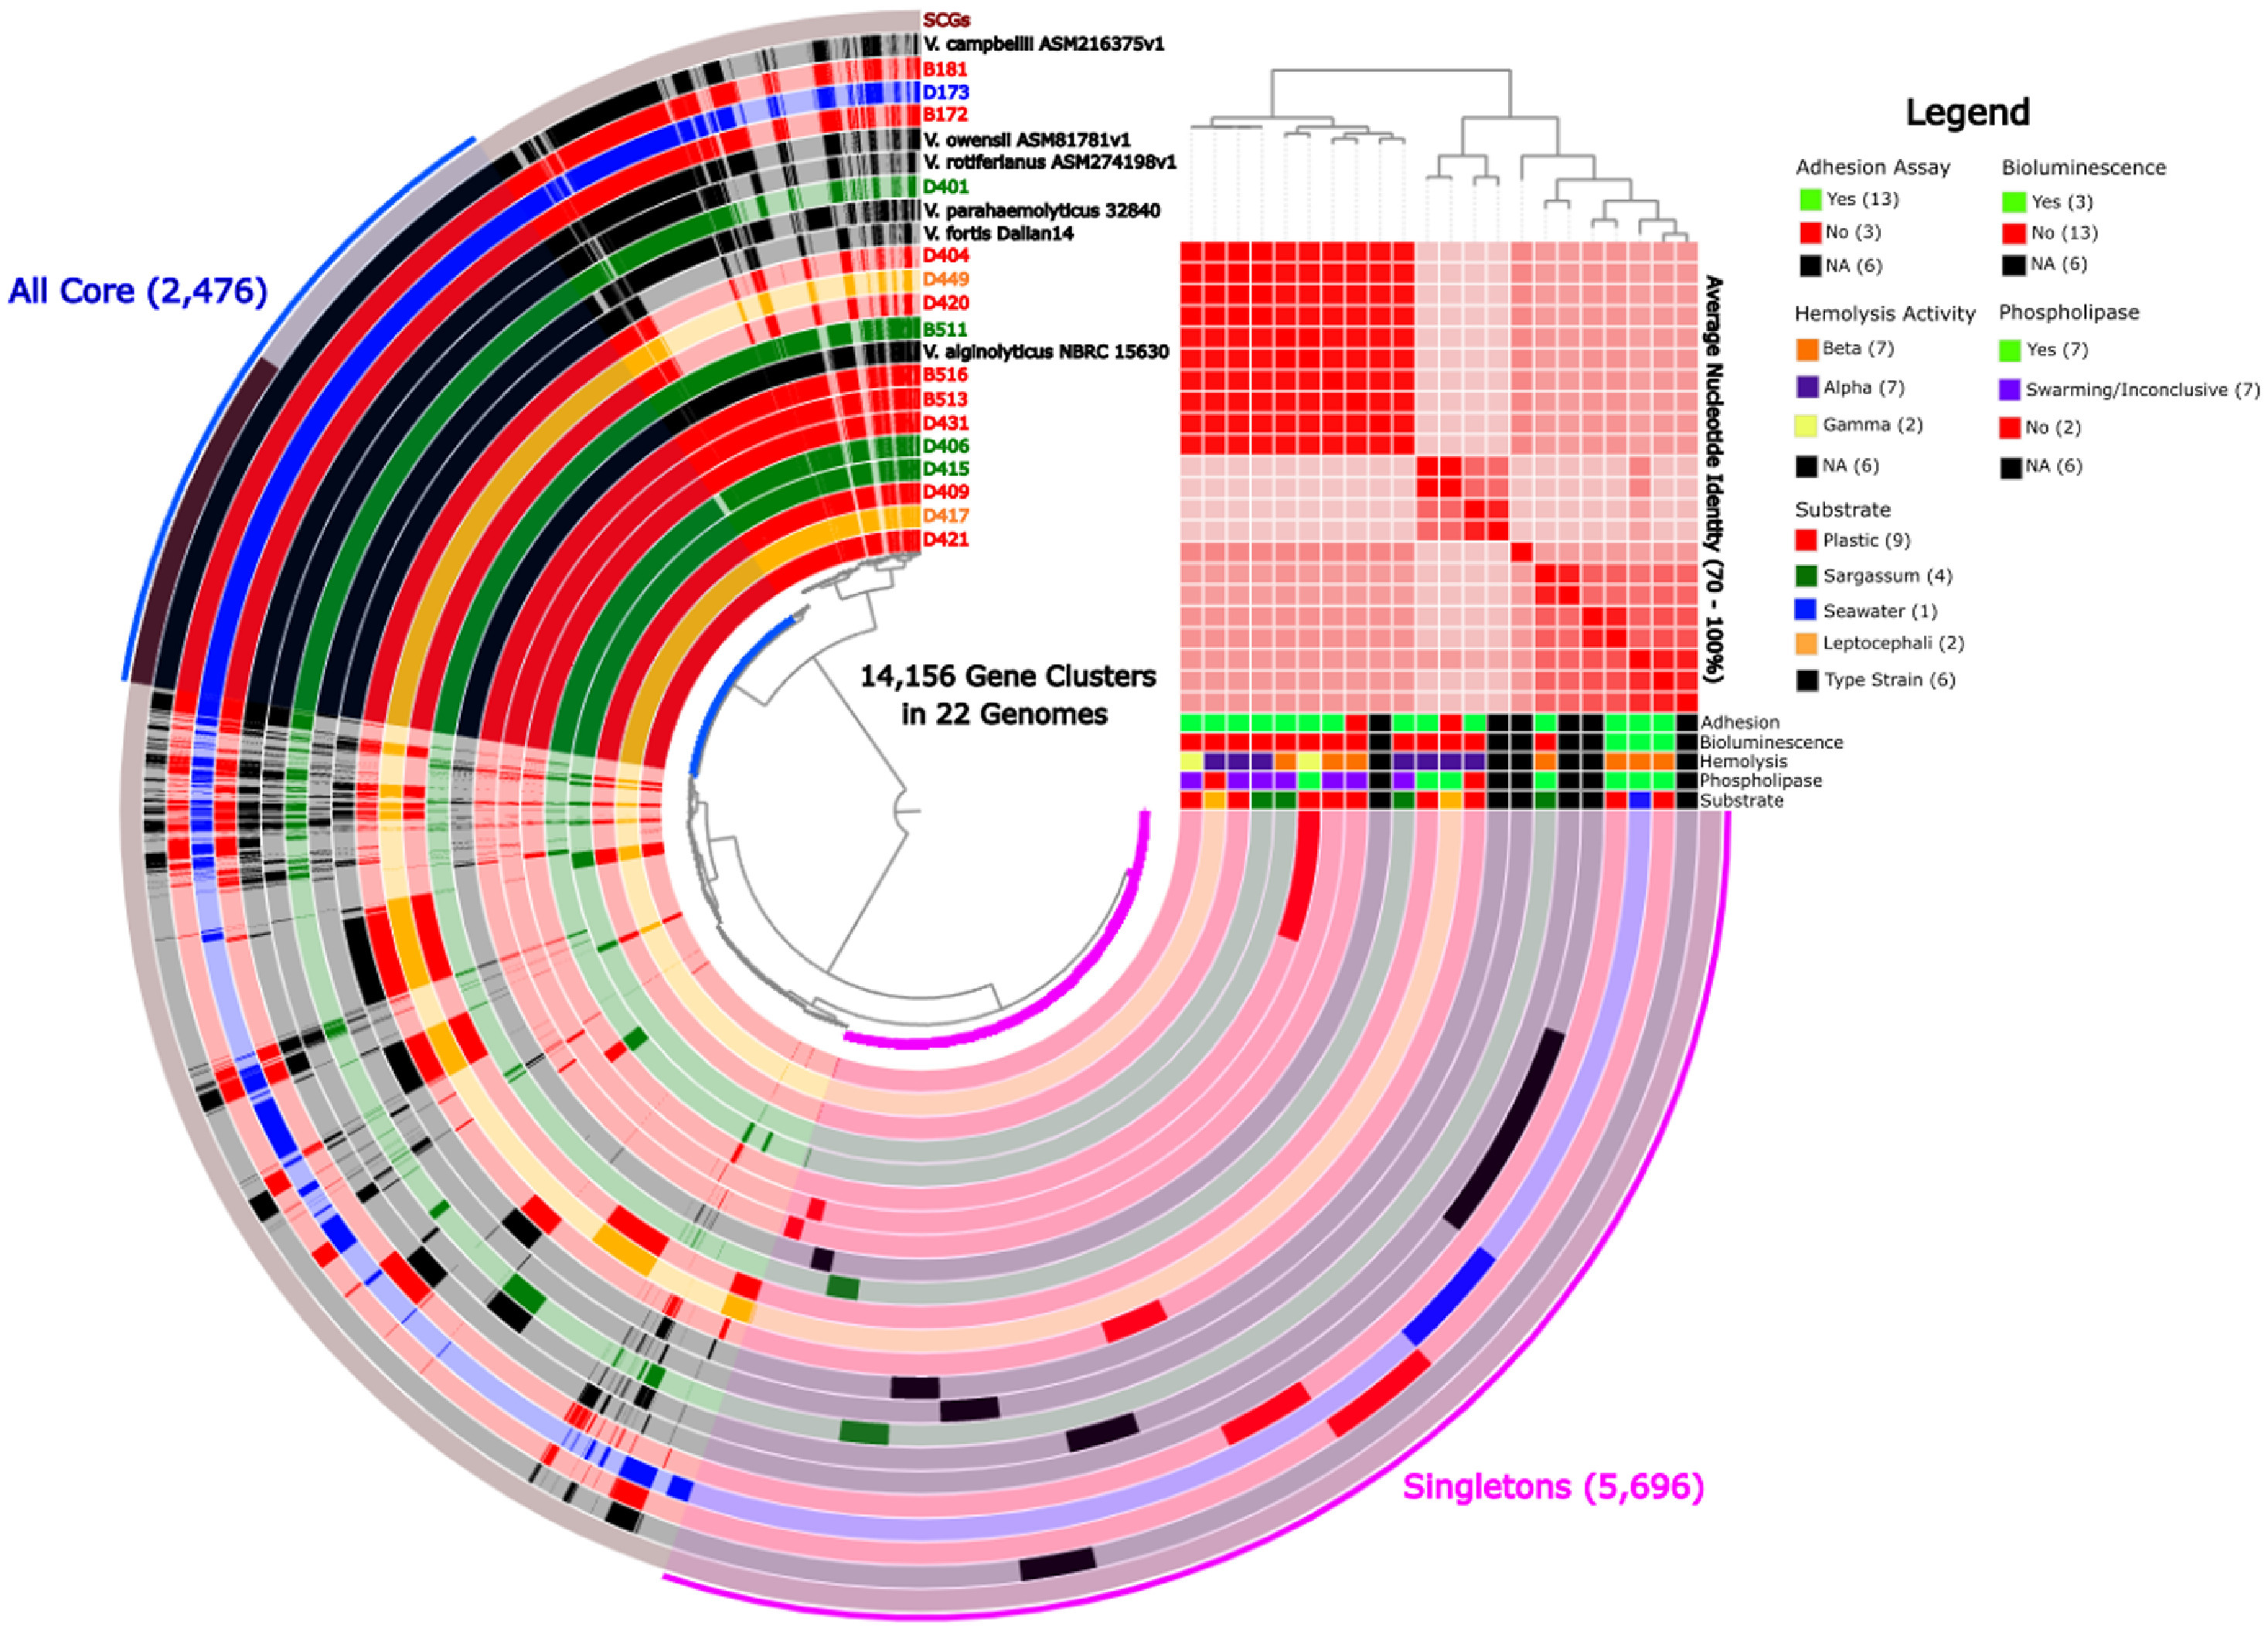 Vibrio pangenome analysis of isolates analyzed in this study. The circular phylogram was created using Anvi'o 7.0 analyses of 16 environmental Vibrio isolates. The colors indicate the respective marine substrate from which each cultivar was isolated: eel leptocephalus (orange), plastic marine debris (red), Sargassum (green), seawater (blue), and type strains (black). All environmental cultivars were tested for biofilm formation, bioluminescence, hemolysis, and phospholipase activity (see Supplemental Information). Results are color-coded in the legend. Average nucleotide identity (ANI) ranges between 100% (dark red) and 70% (pink) are also indicated, with the cladogram at the top right indicating ANI clustering. SCGs indicated by the outer circle denotes single copy genes. Strain names indicated at top continue through the circular dendrogram to the ANI and clade diagram. Graphic: Mincer, et al., 2023 / Water Research